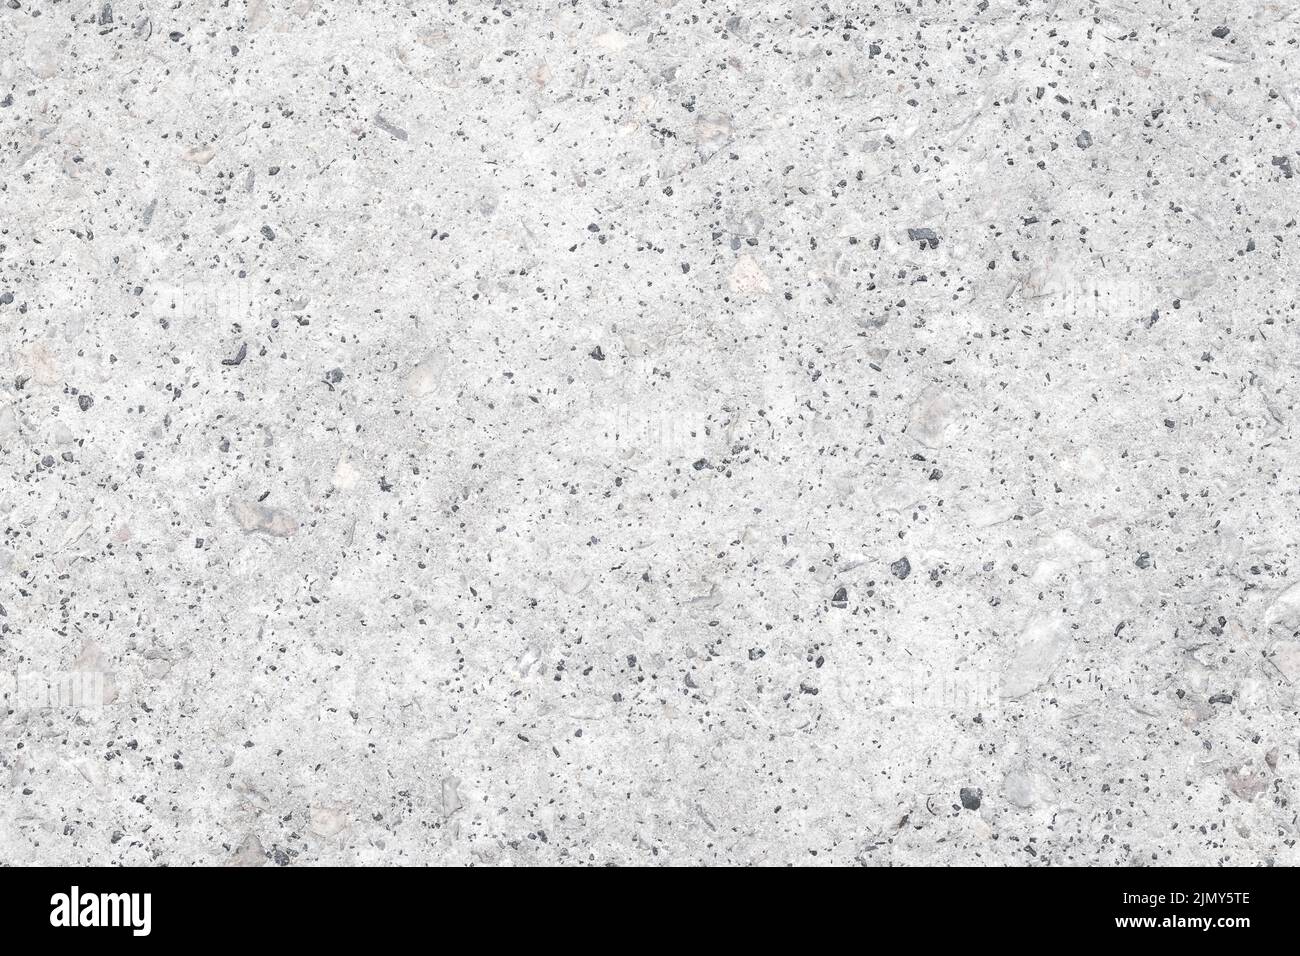 Granite texture, natural old rough gray concrete wall. Grey pattern of tile floor for design, grainy urban wall, spotted cement surface. Template with Stock Photo